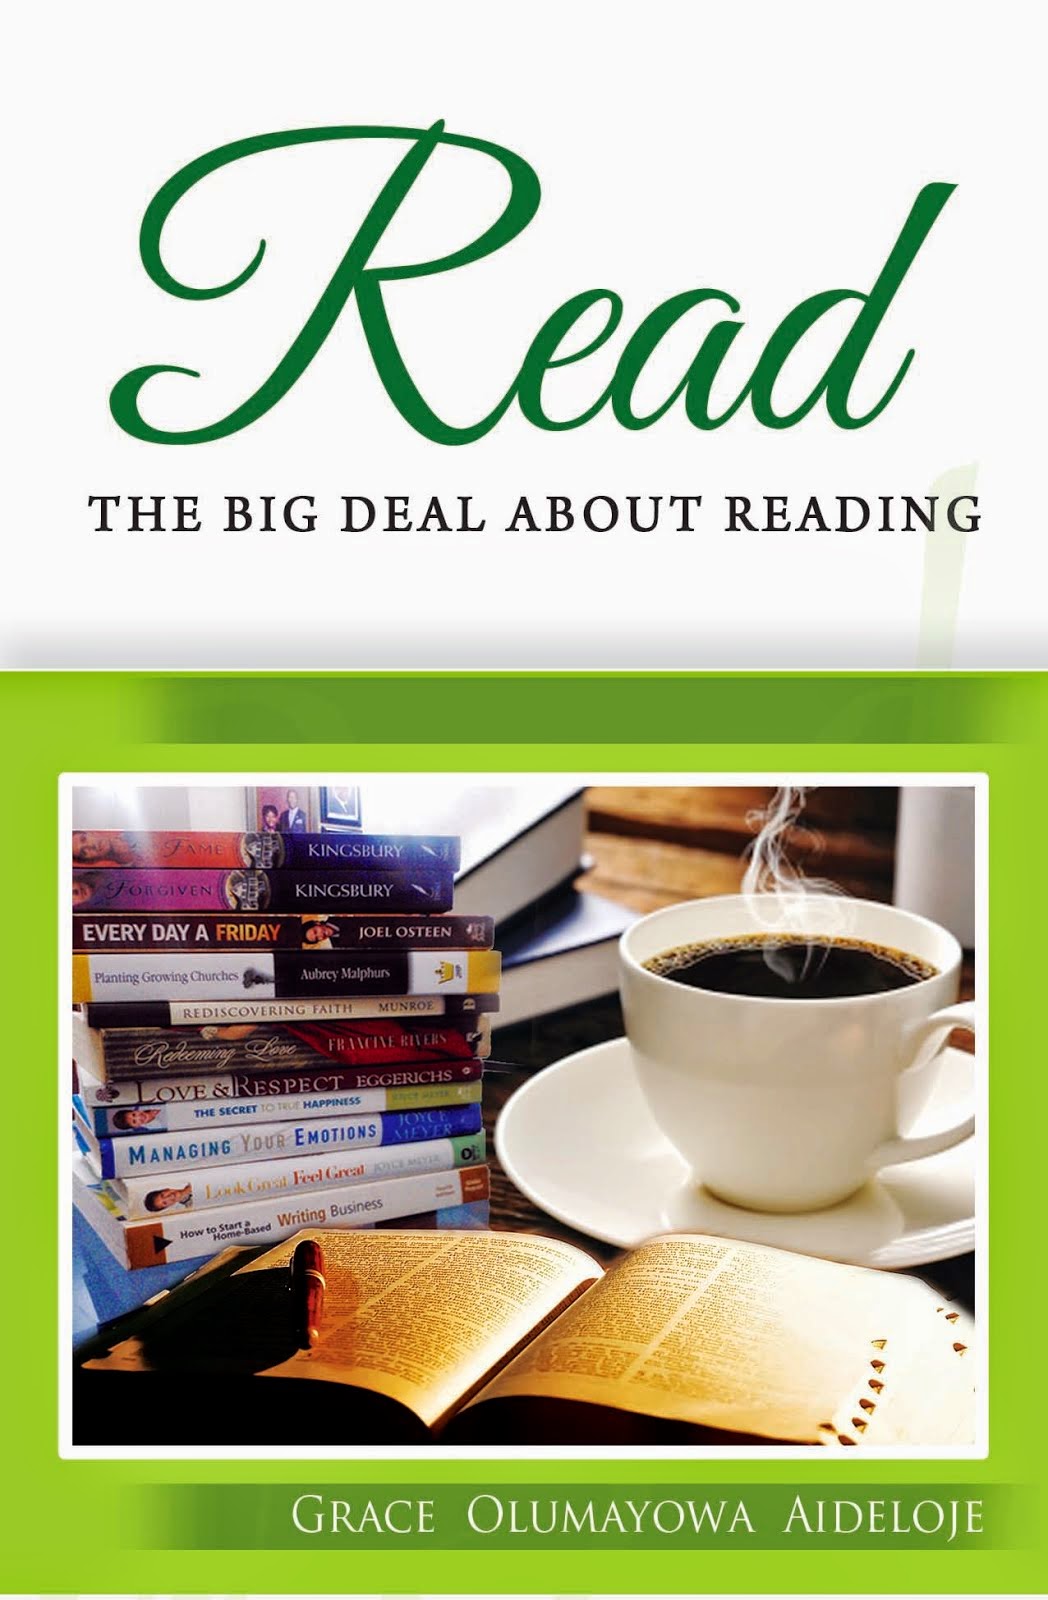 READ - The Big Deal About Reading